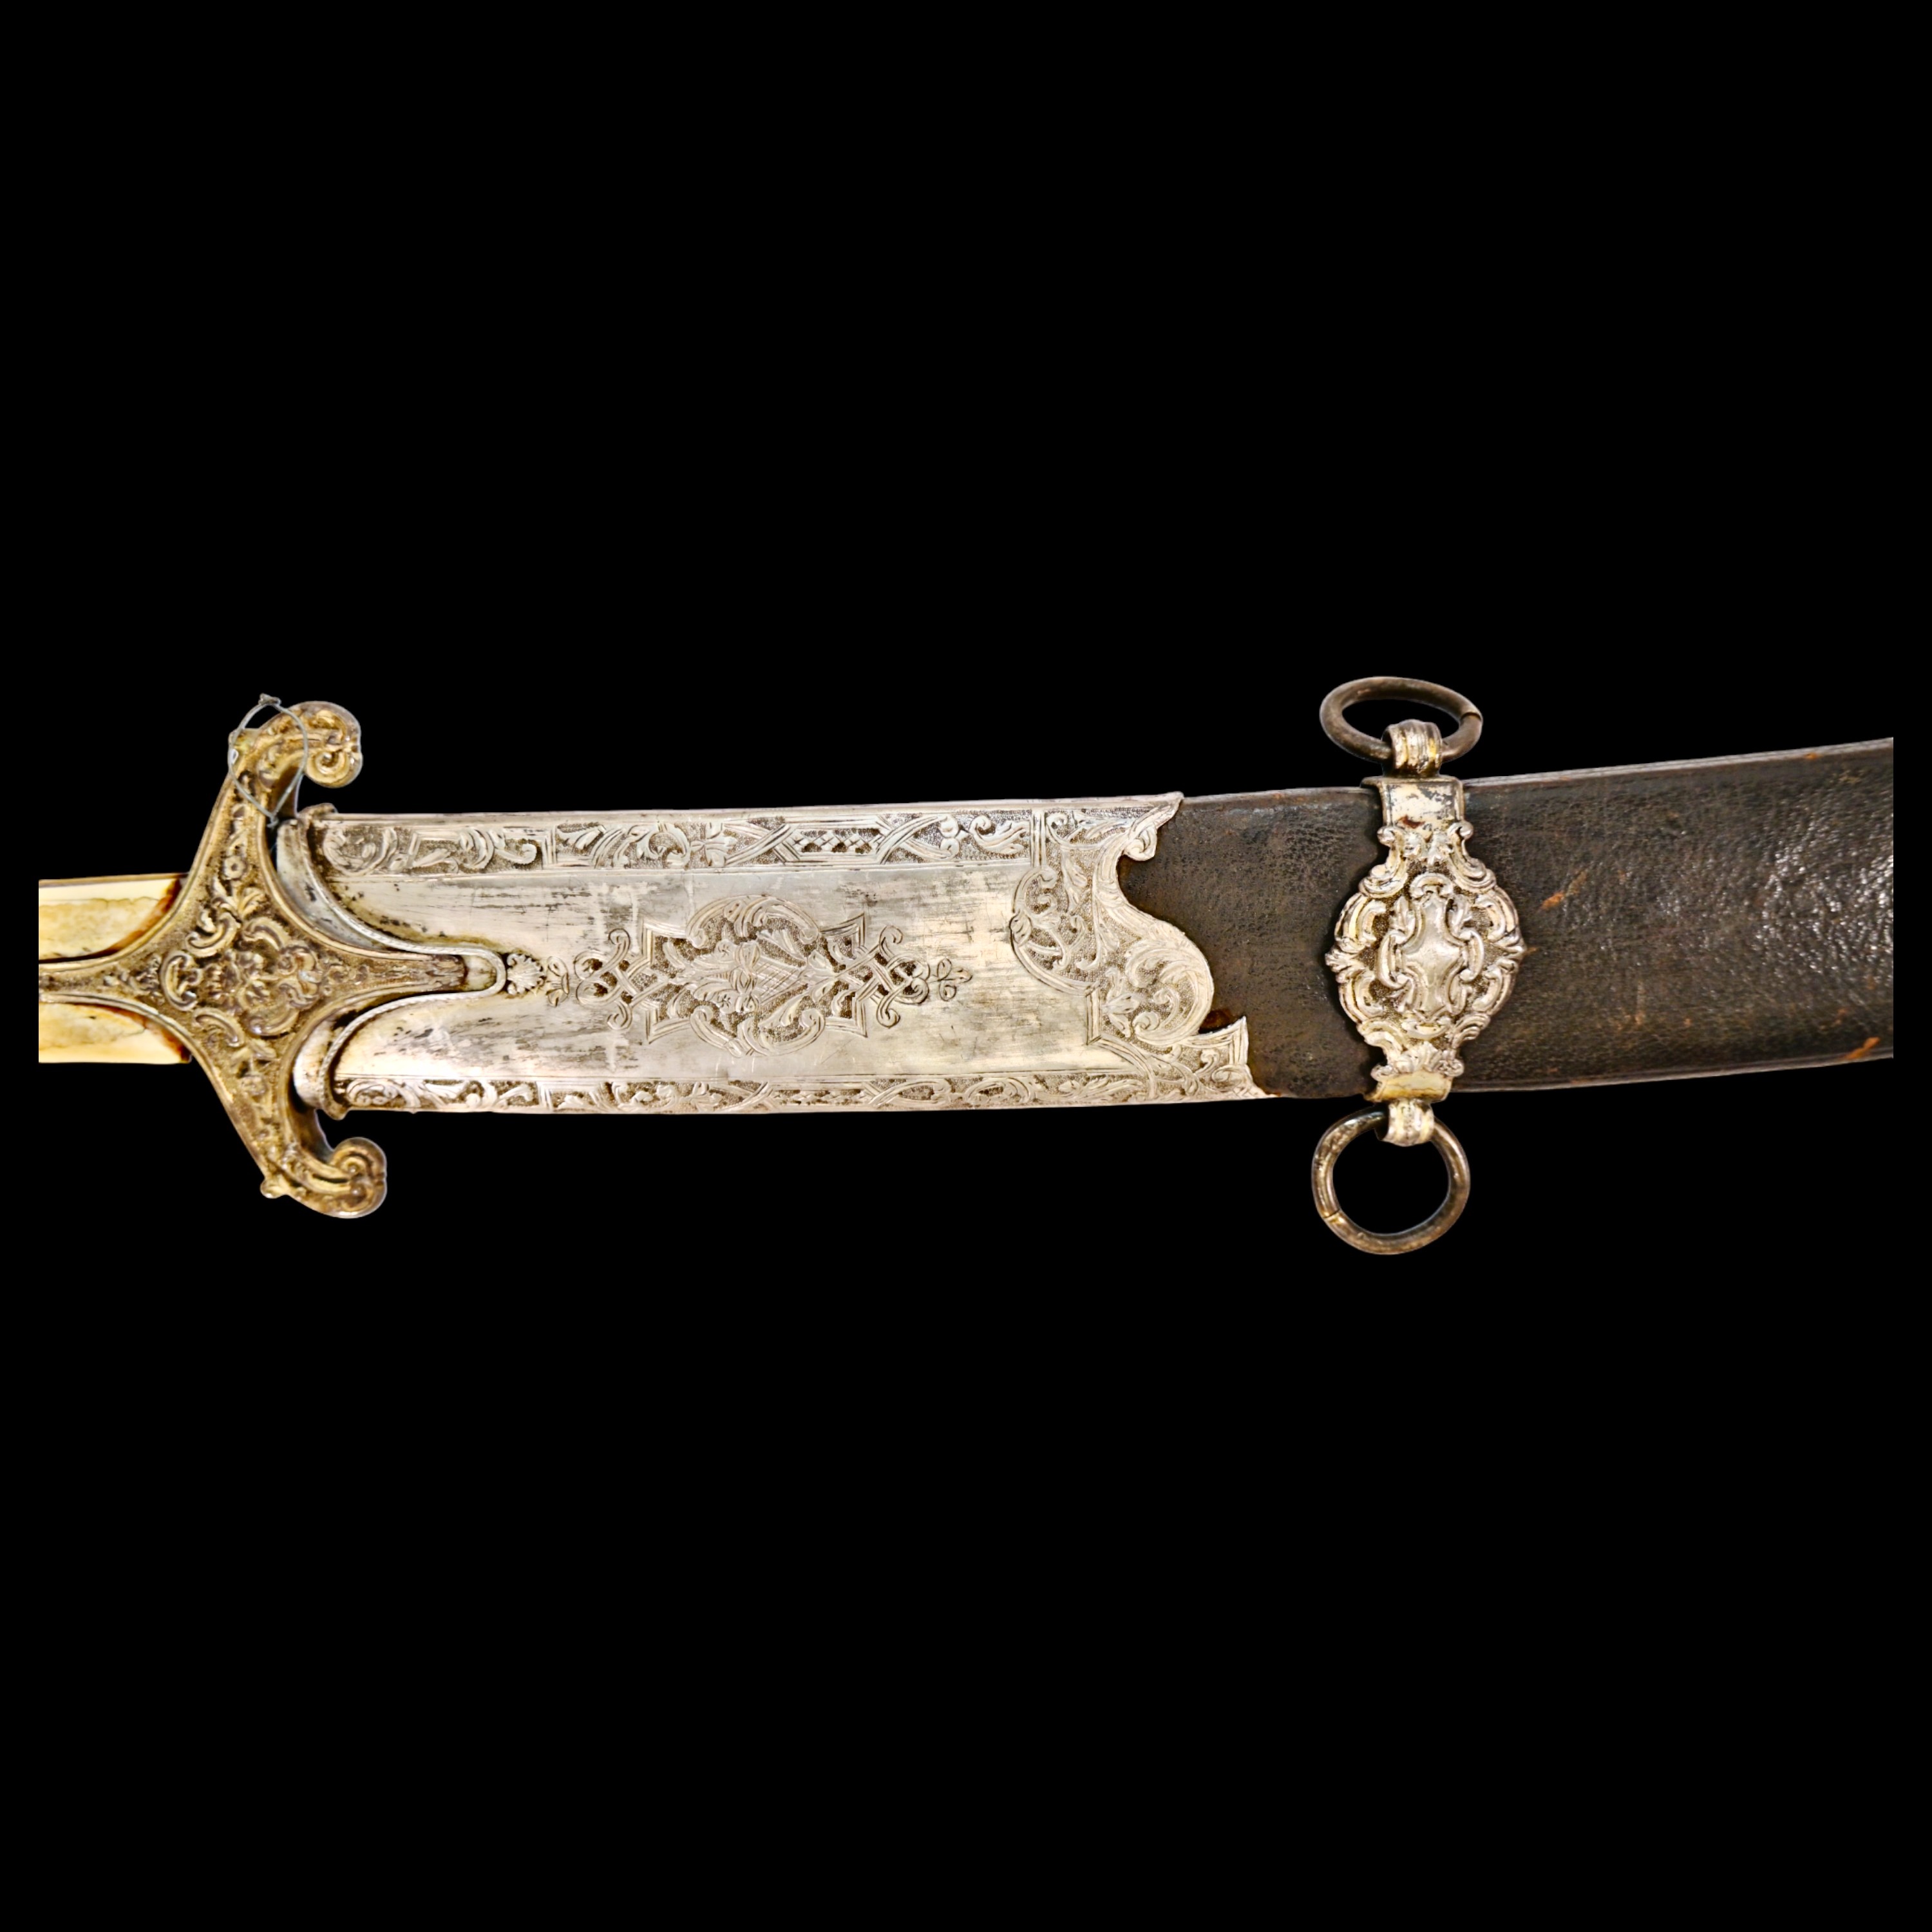 Rare Ottoman saber KARABELA, wootz blade, silver with the tugra of Sultan Ahmed III, early 18th C. - Image 5 of 27